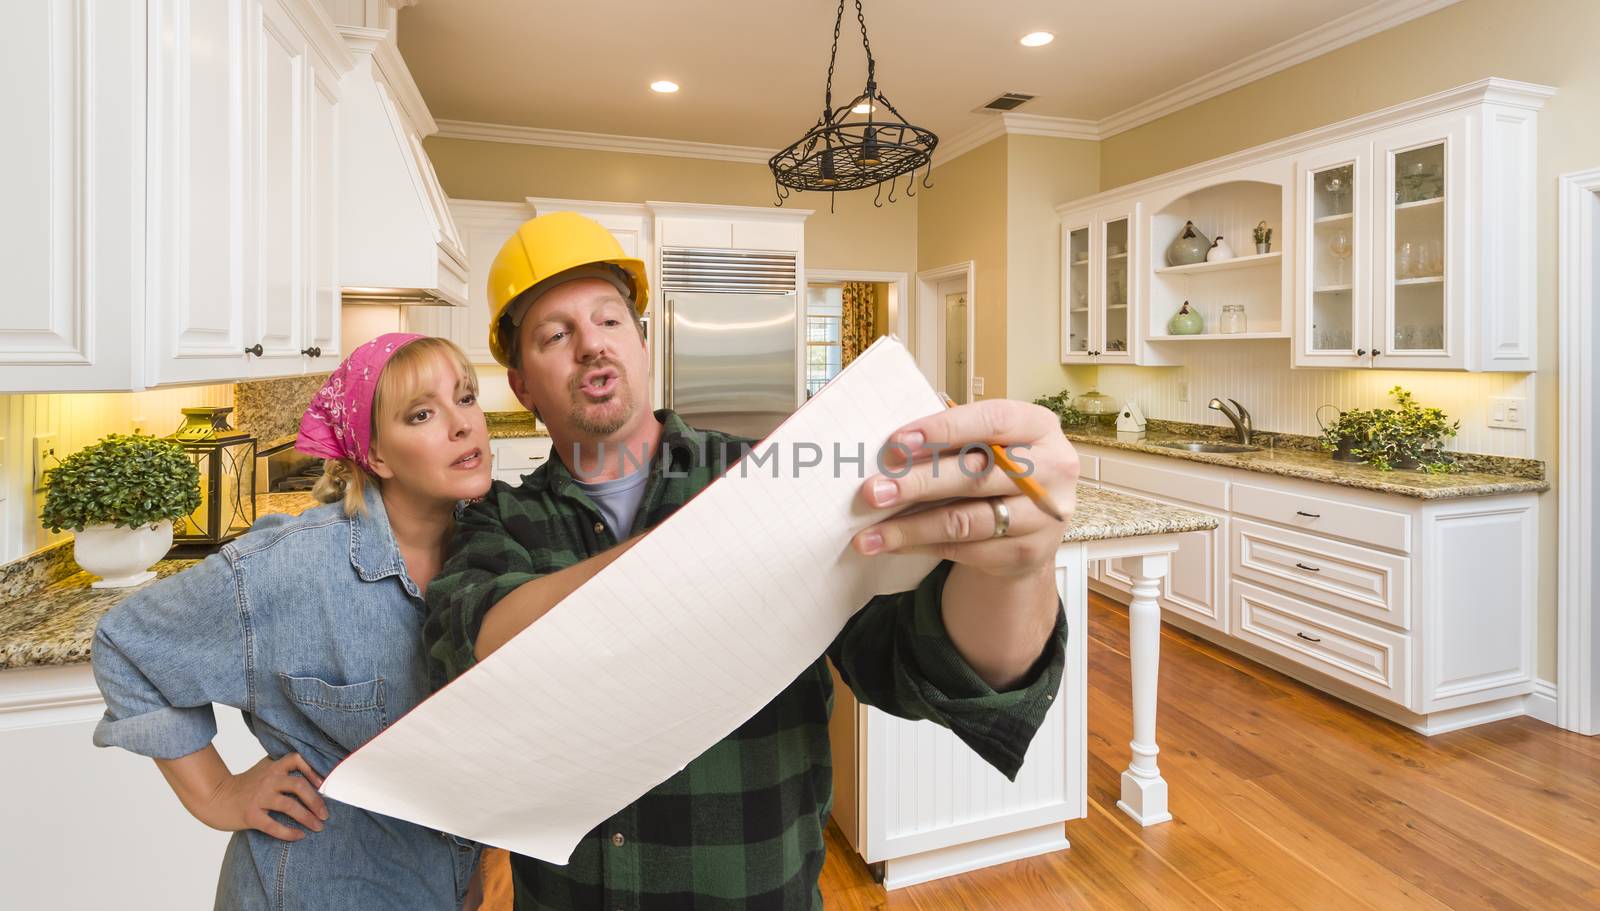 Contractor Discussing Plans with Woman Inside Custom Kitchen Int by Feverpitched